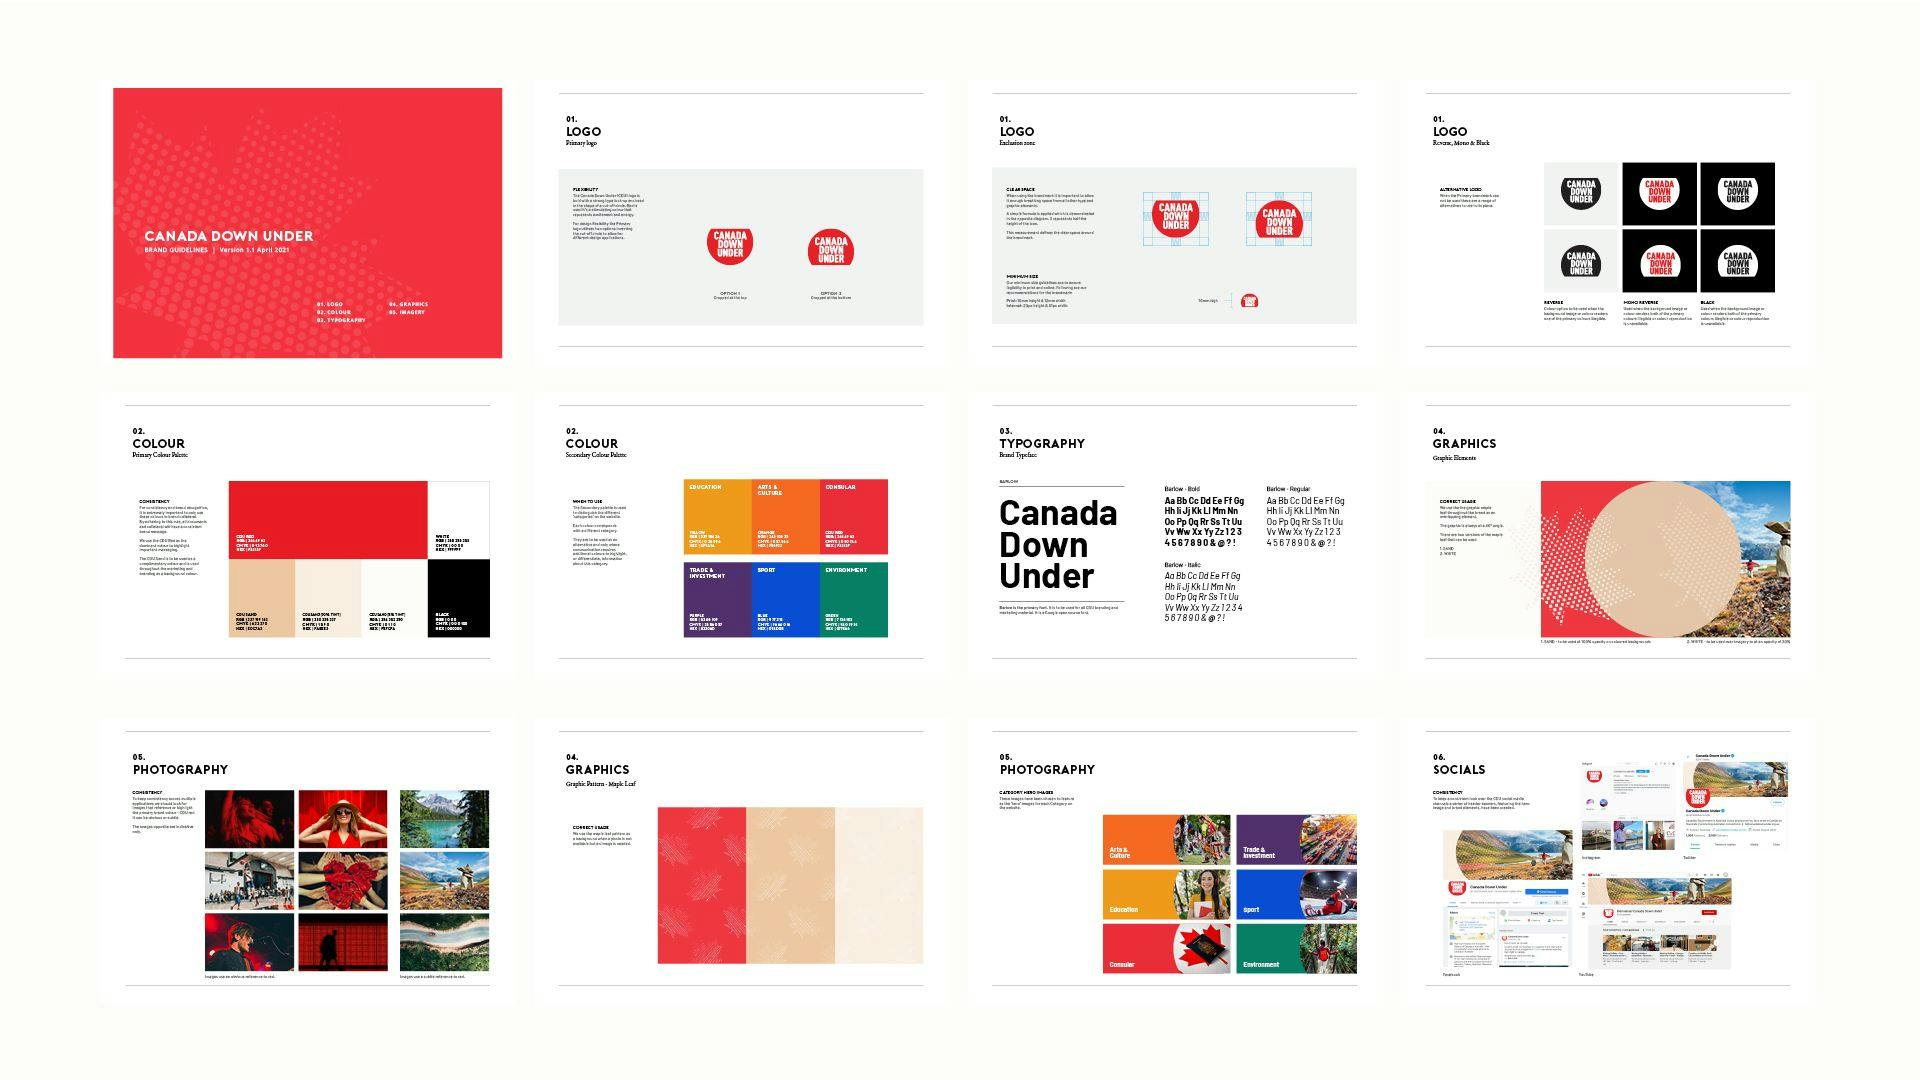 A page from the Canada Down Under brand style guide